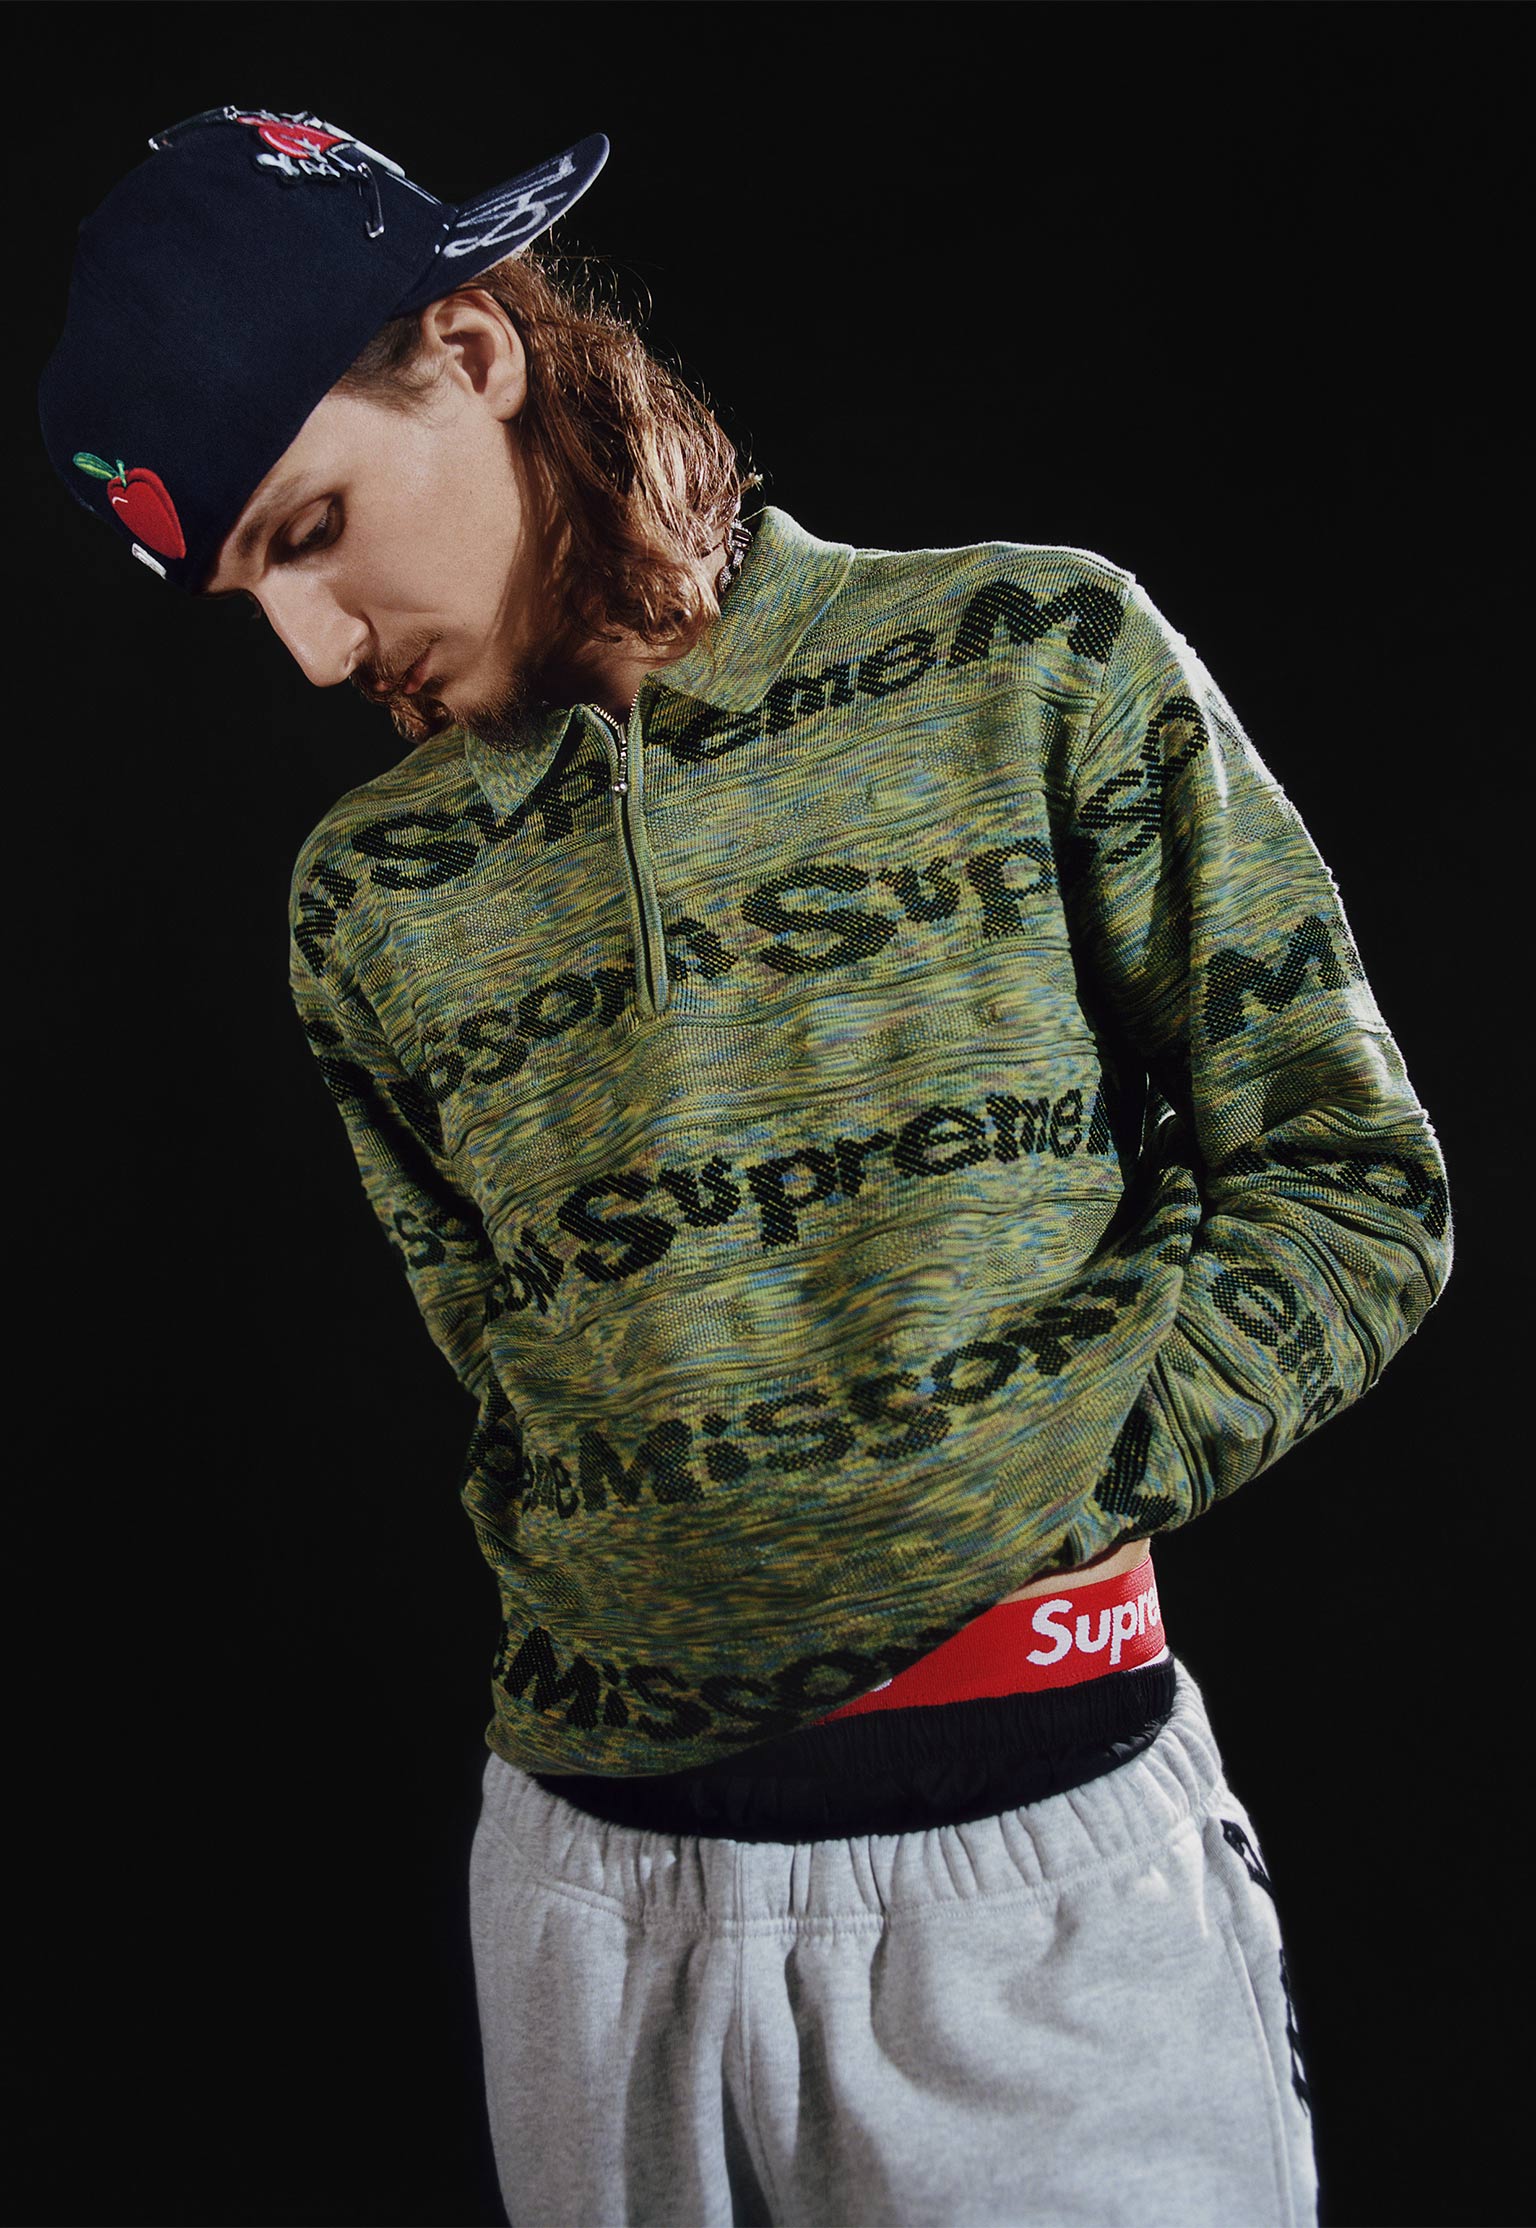 The model is wearing a zip-neck sweater with an embroidered texture 